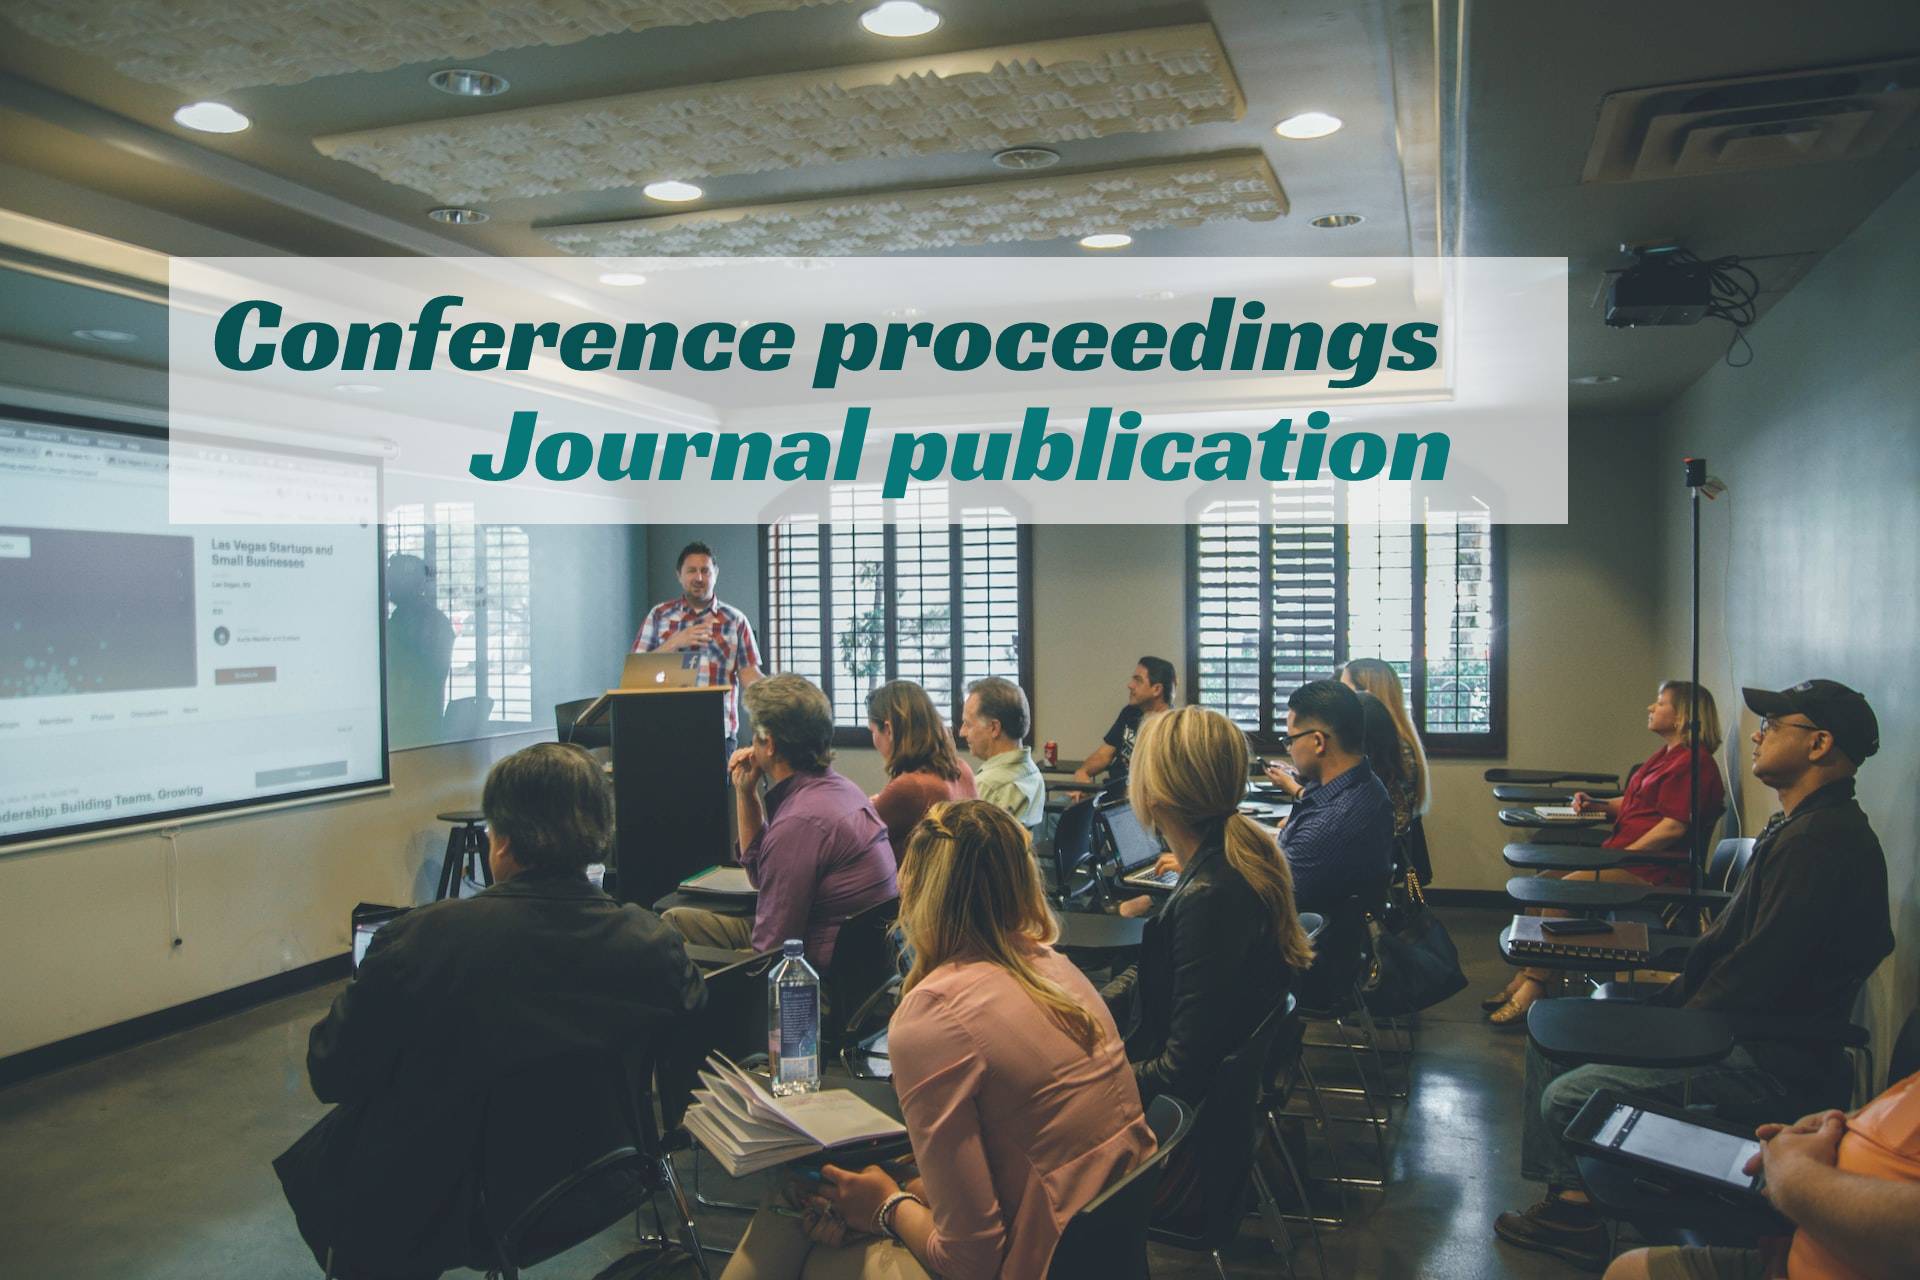 Facts to know about academic conferences & journal publication